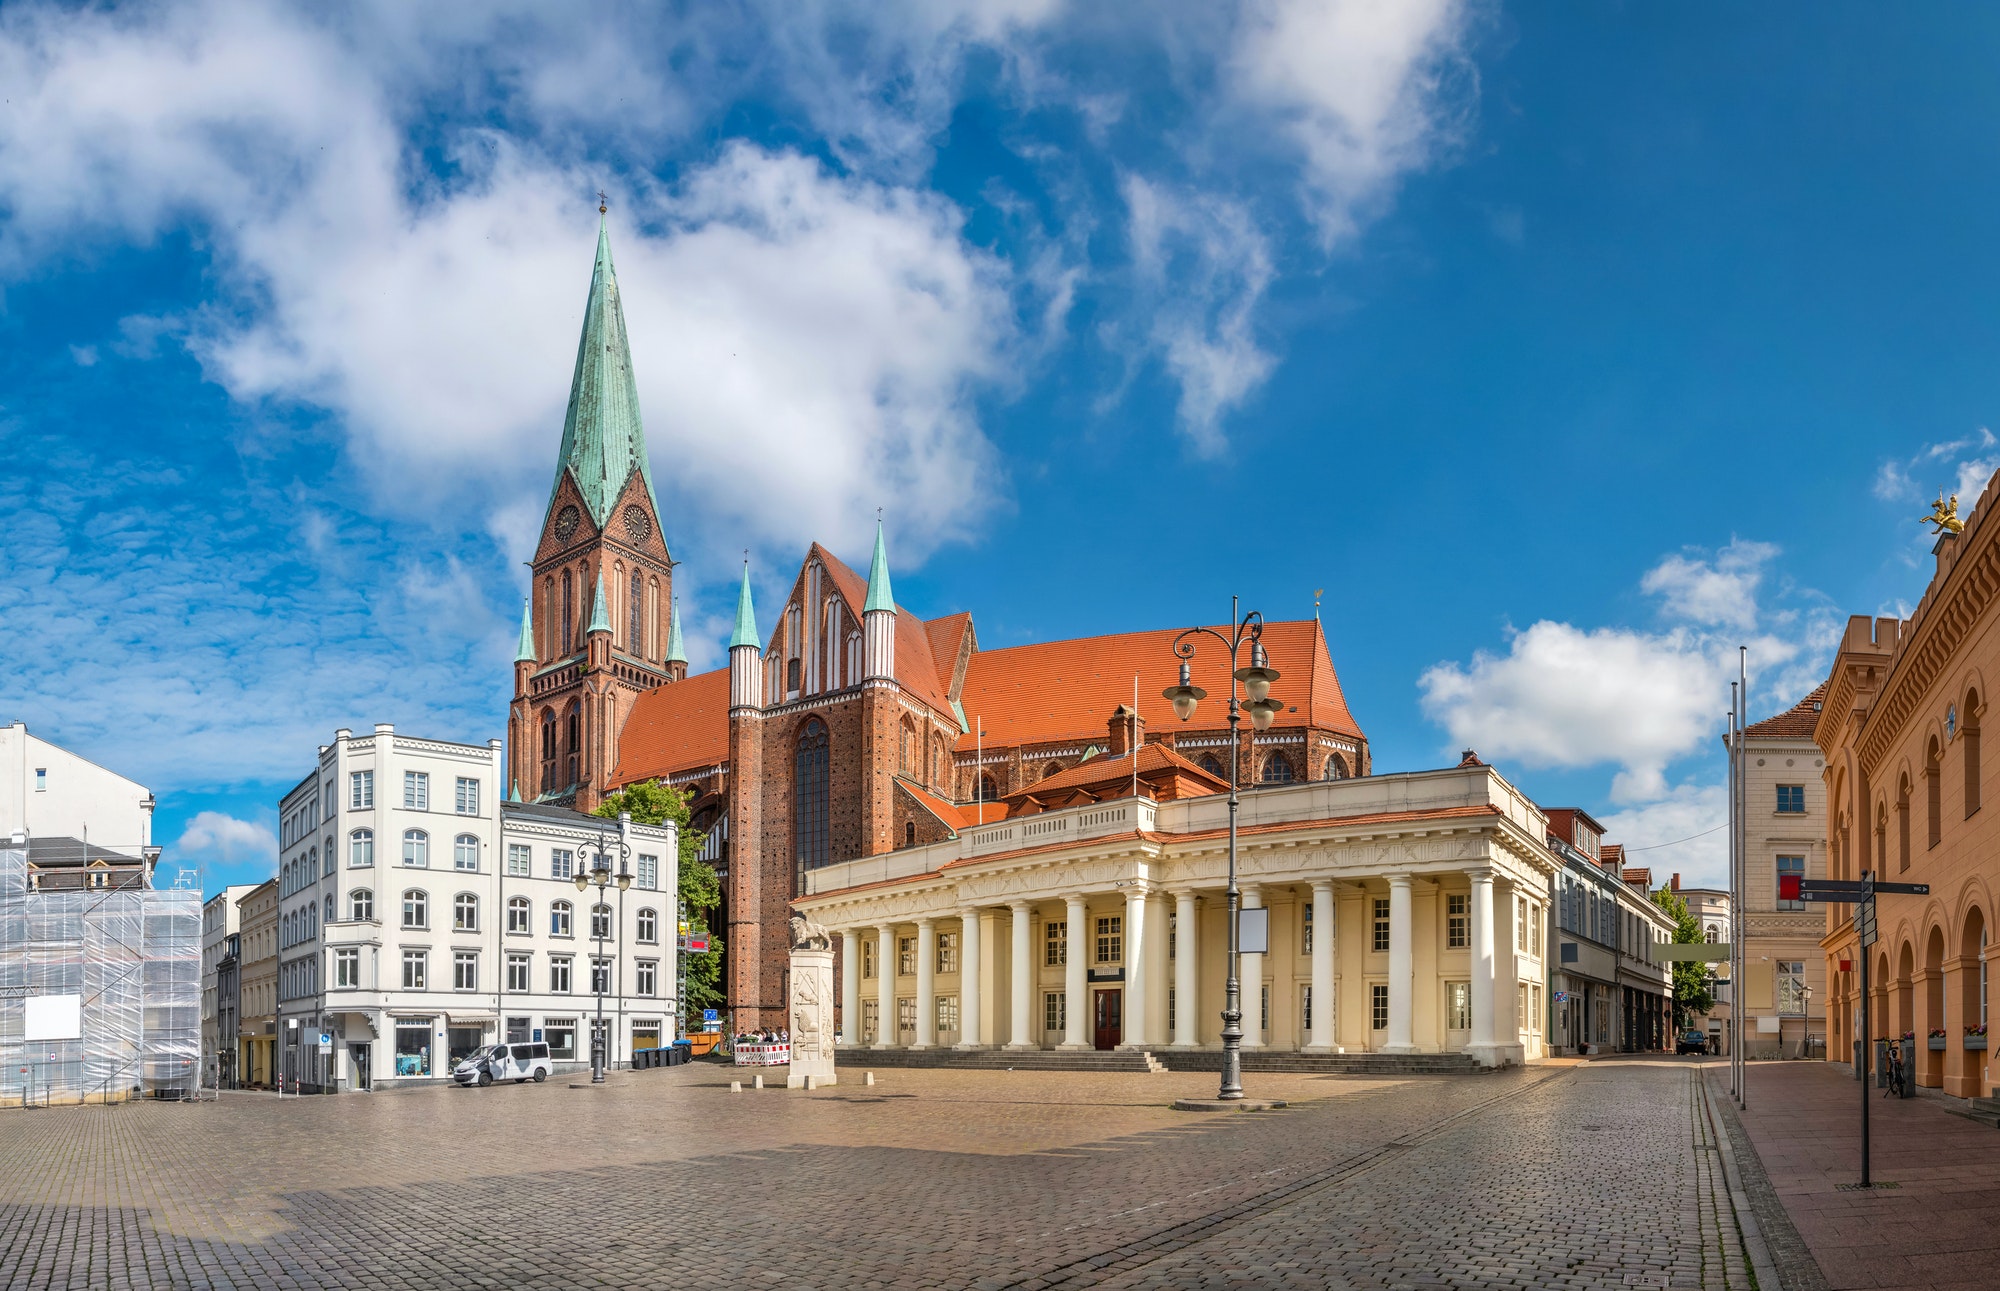 Marktplatz square and Cathedral in Schwerin, Germany